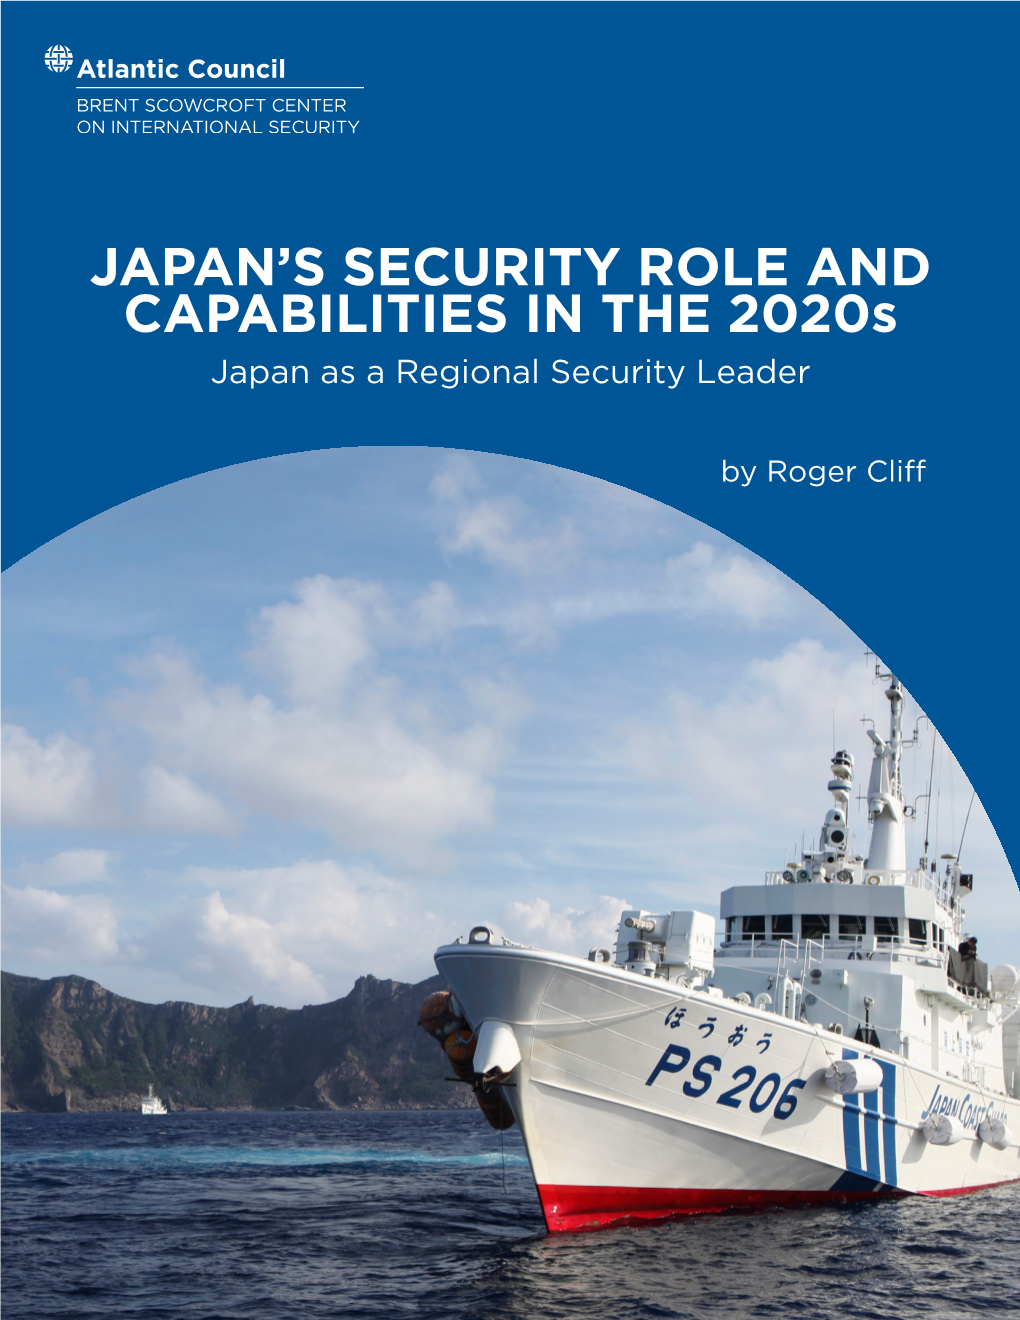 Japan's Security Role and Capabilities in The